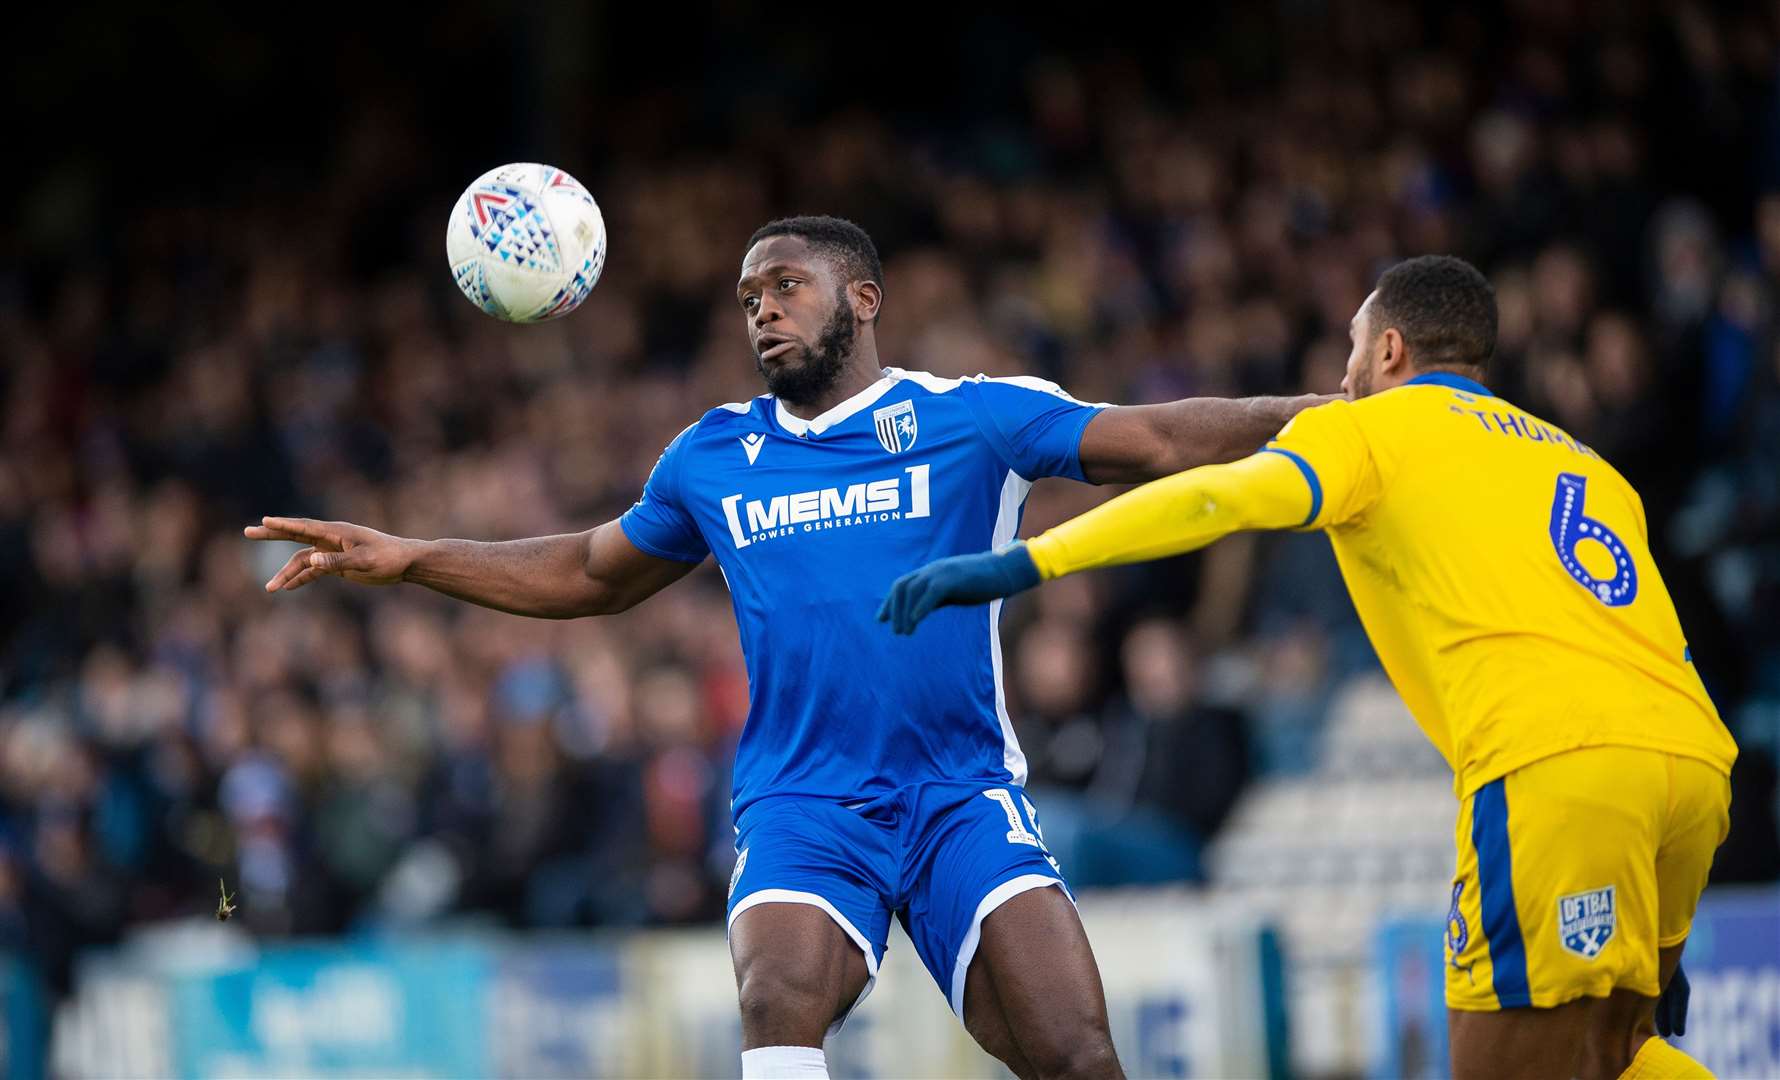 John Akinde is an injury doubt for the Gills again